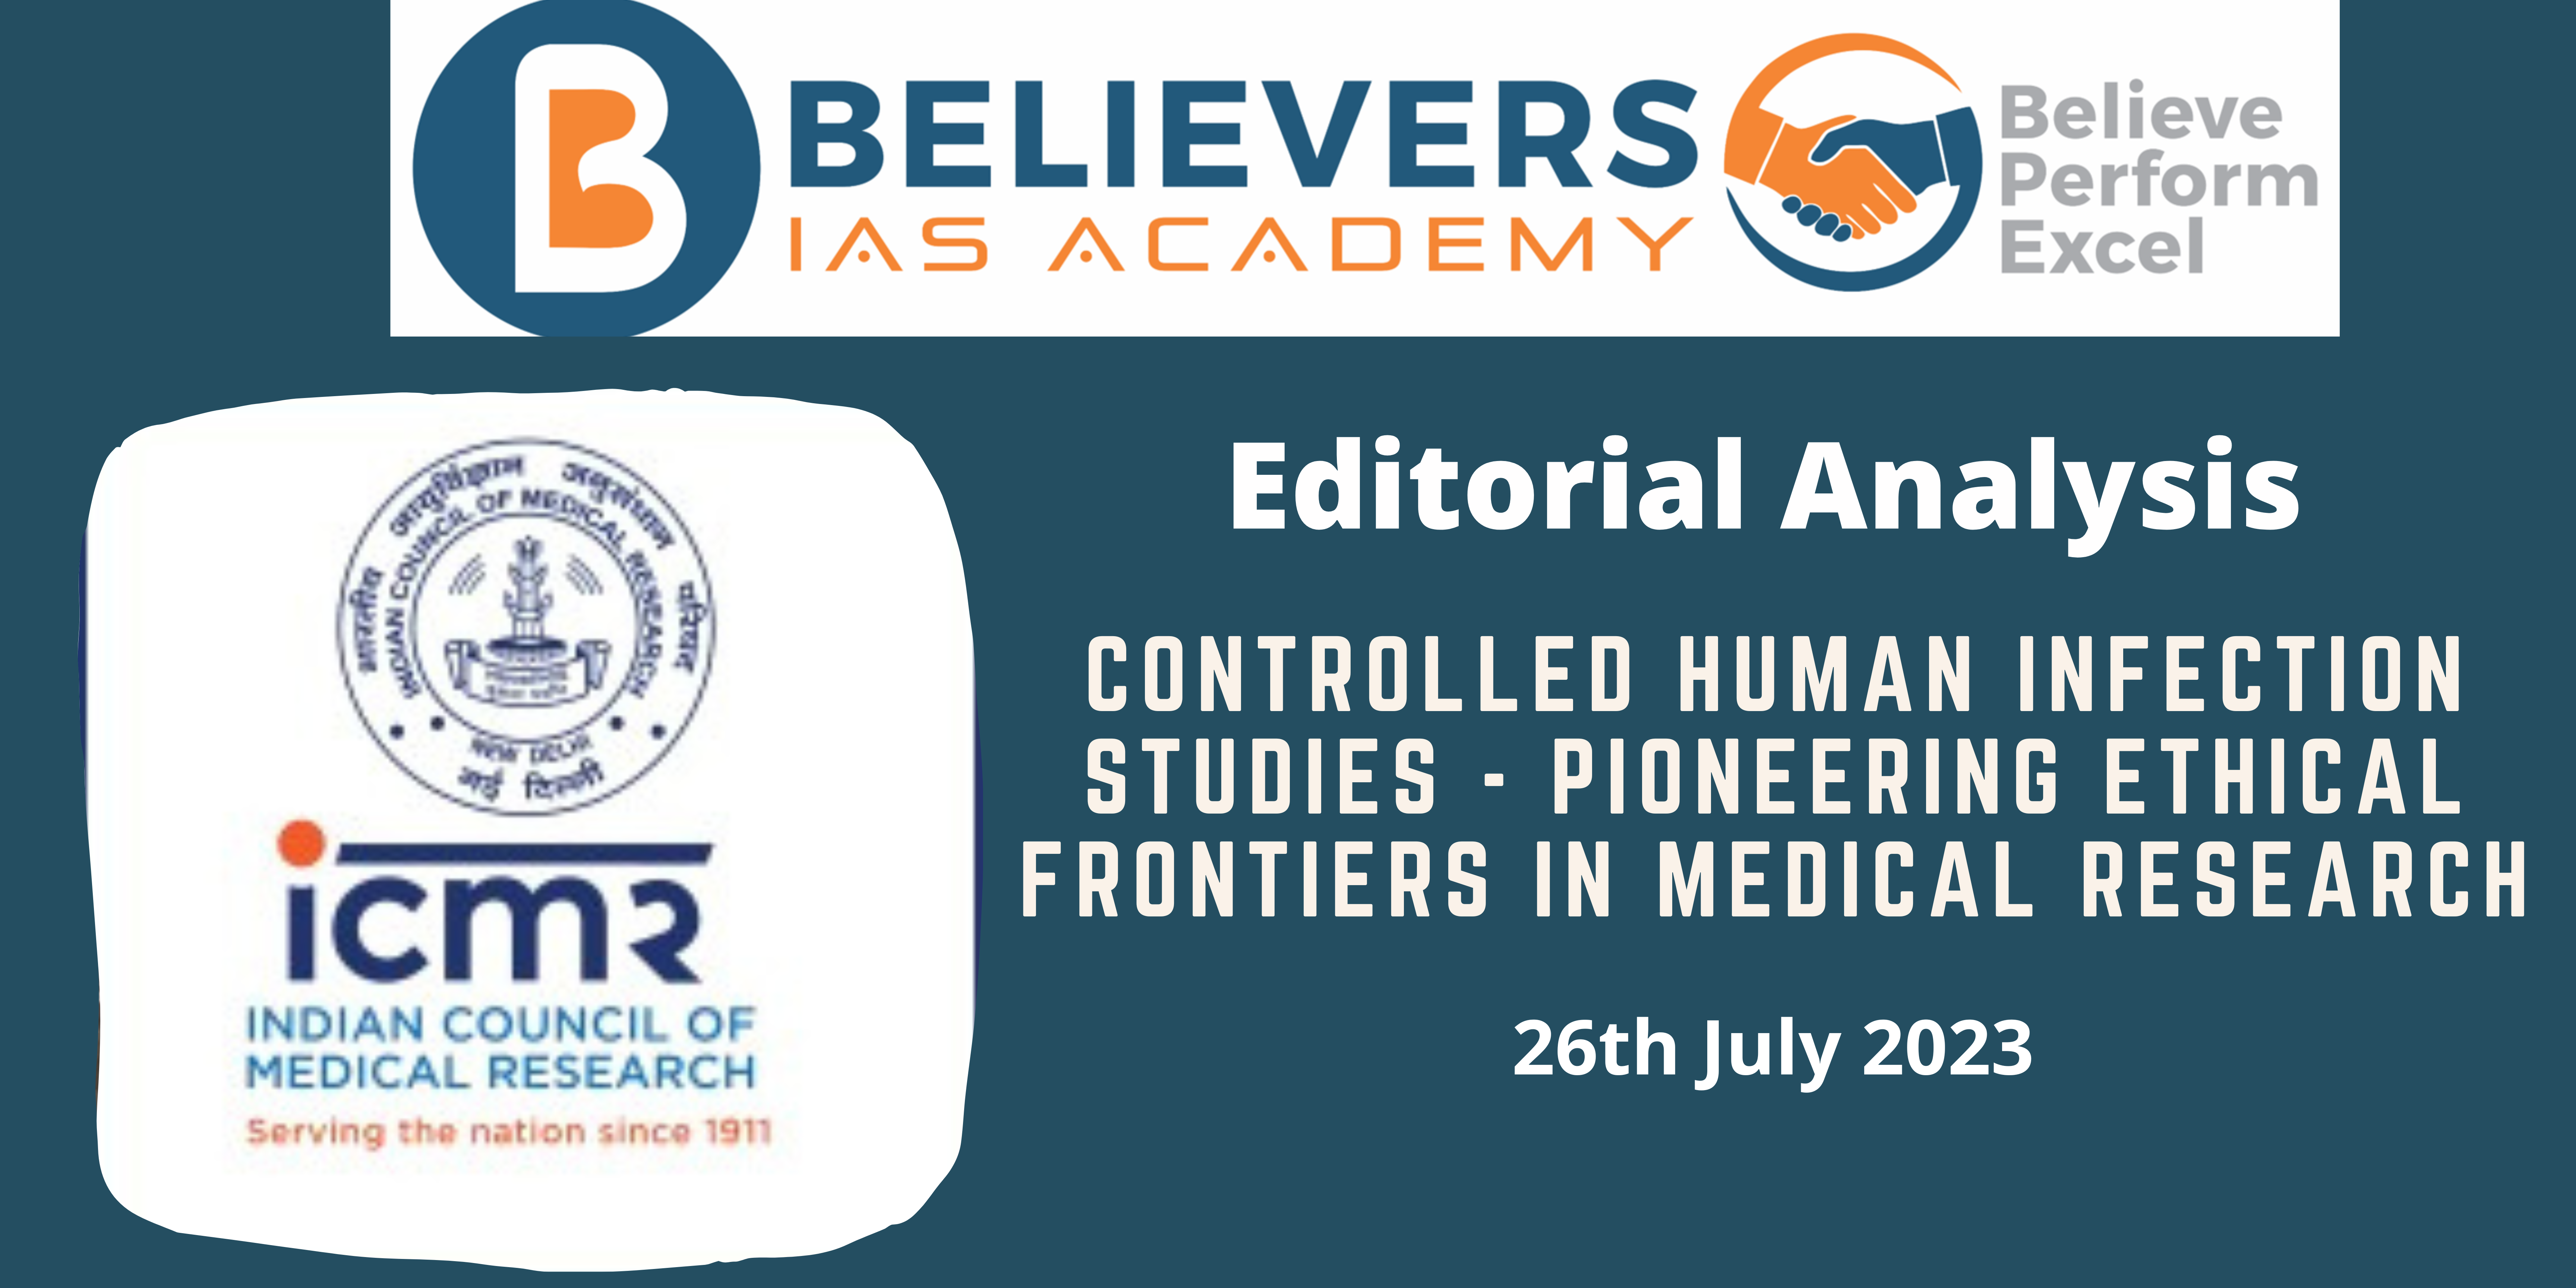 Controlled Human Infection Studies - Pioneering Ethical Frontiers in Medical Research